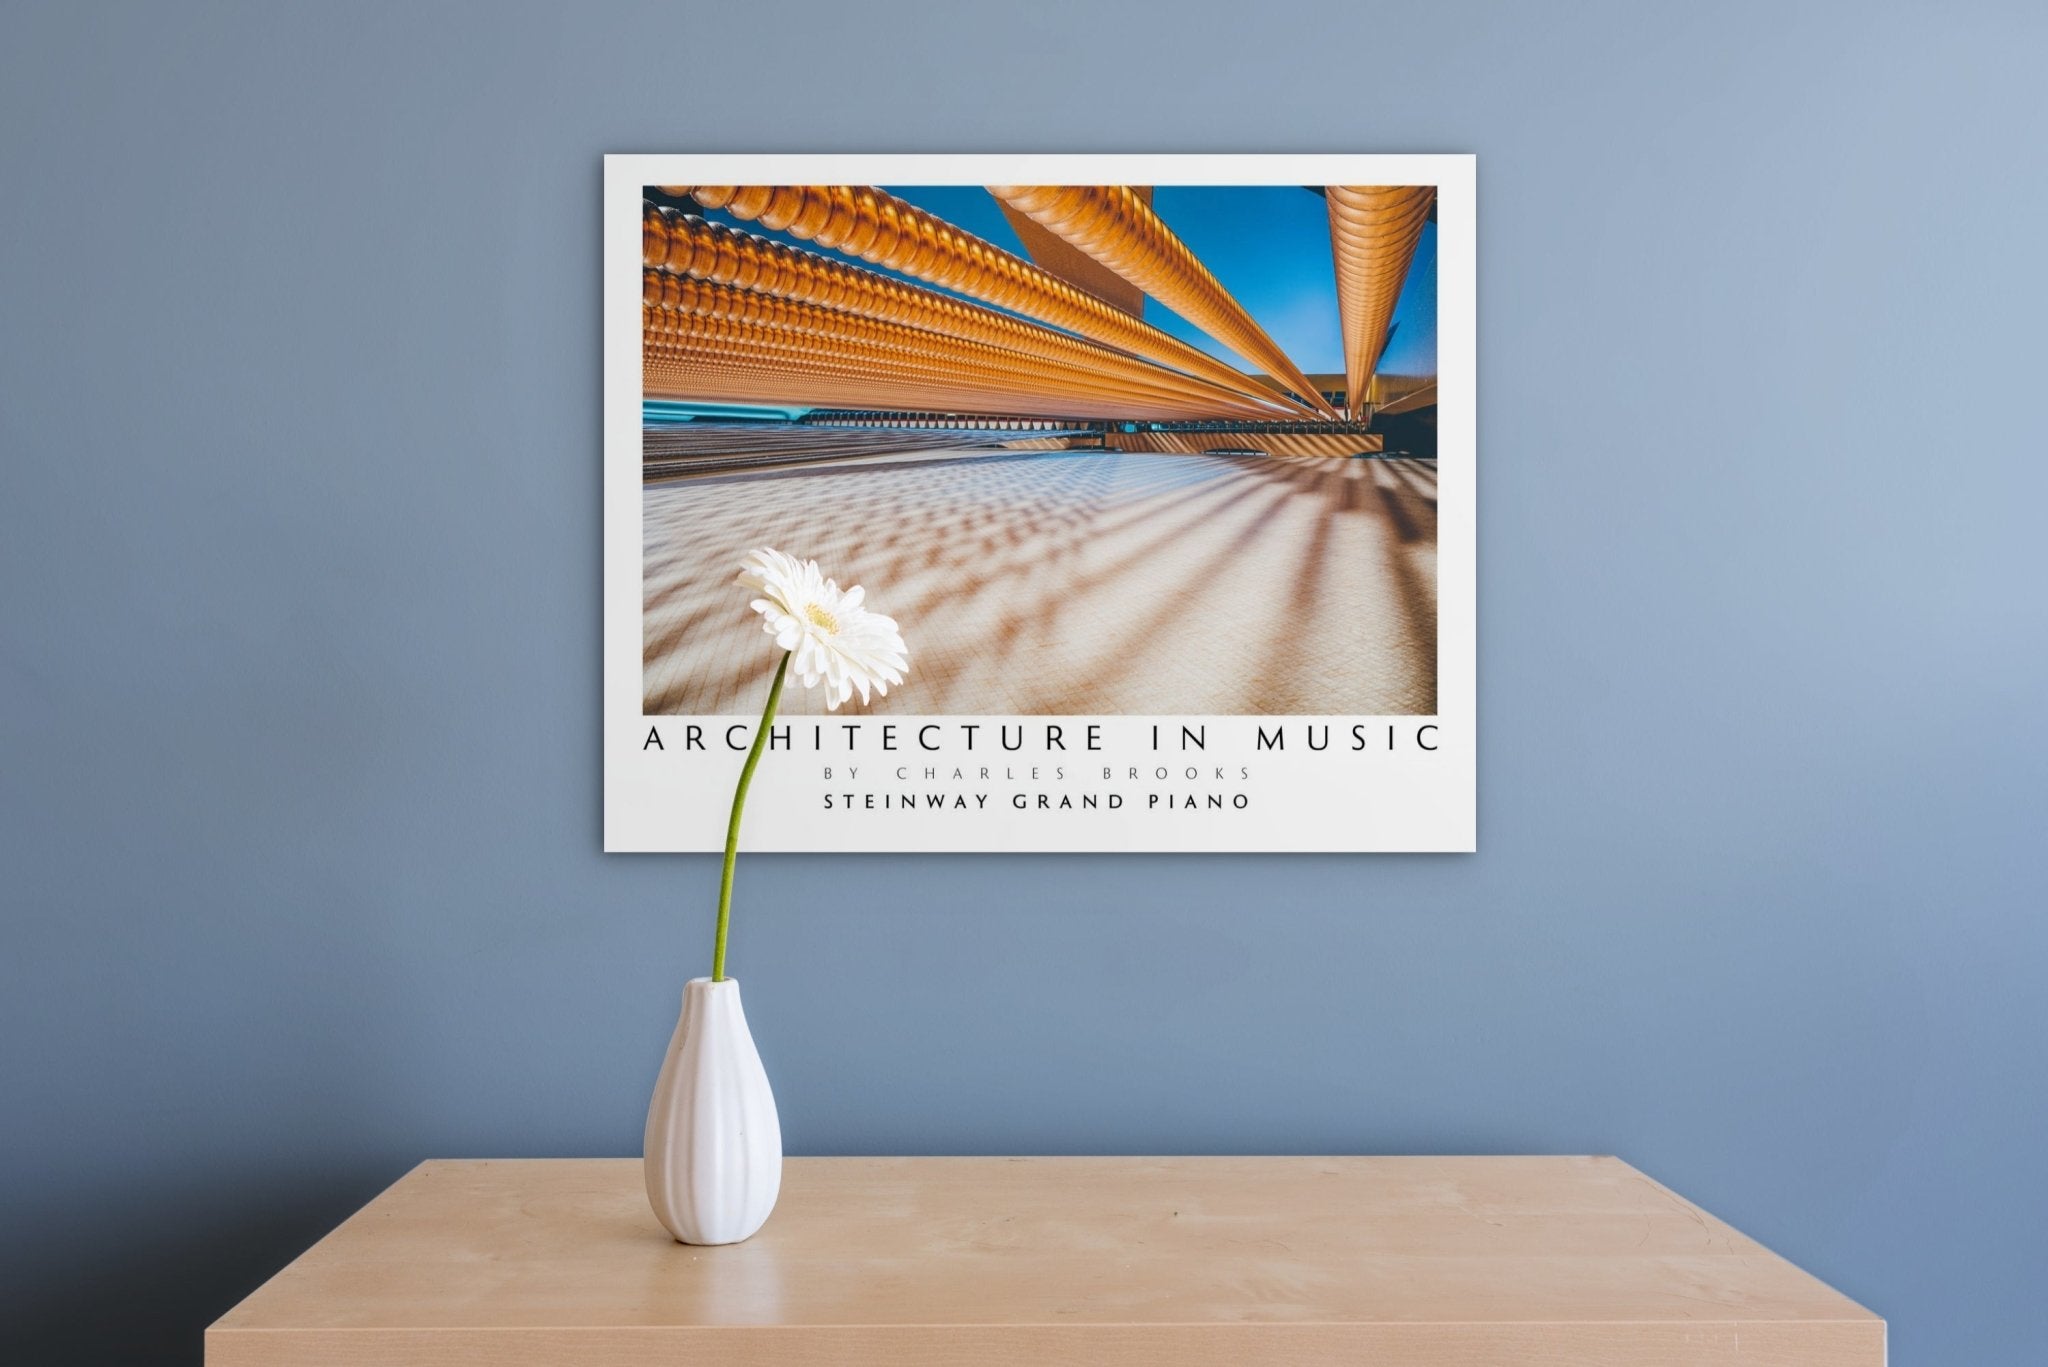 Photo of The Exquisite Architecture of Steinway, Part 7. High Quality Poster. - Giclée Poster Print - Architecture In Music